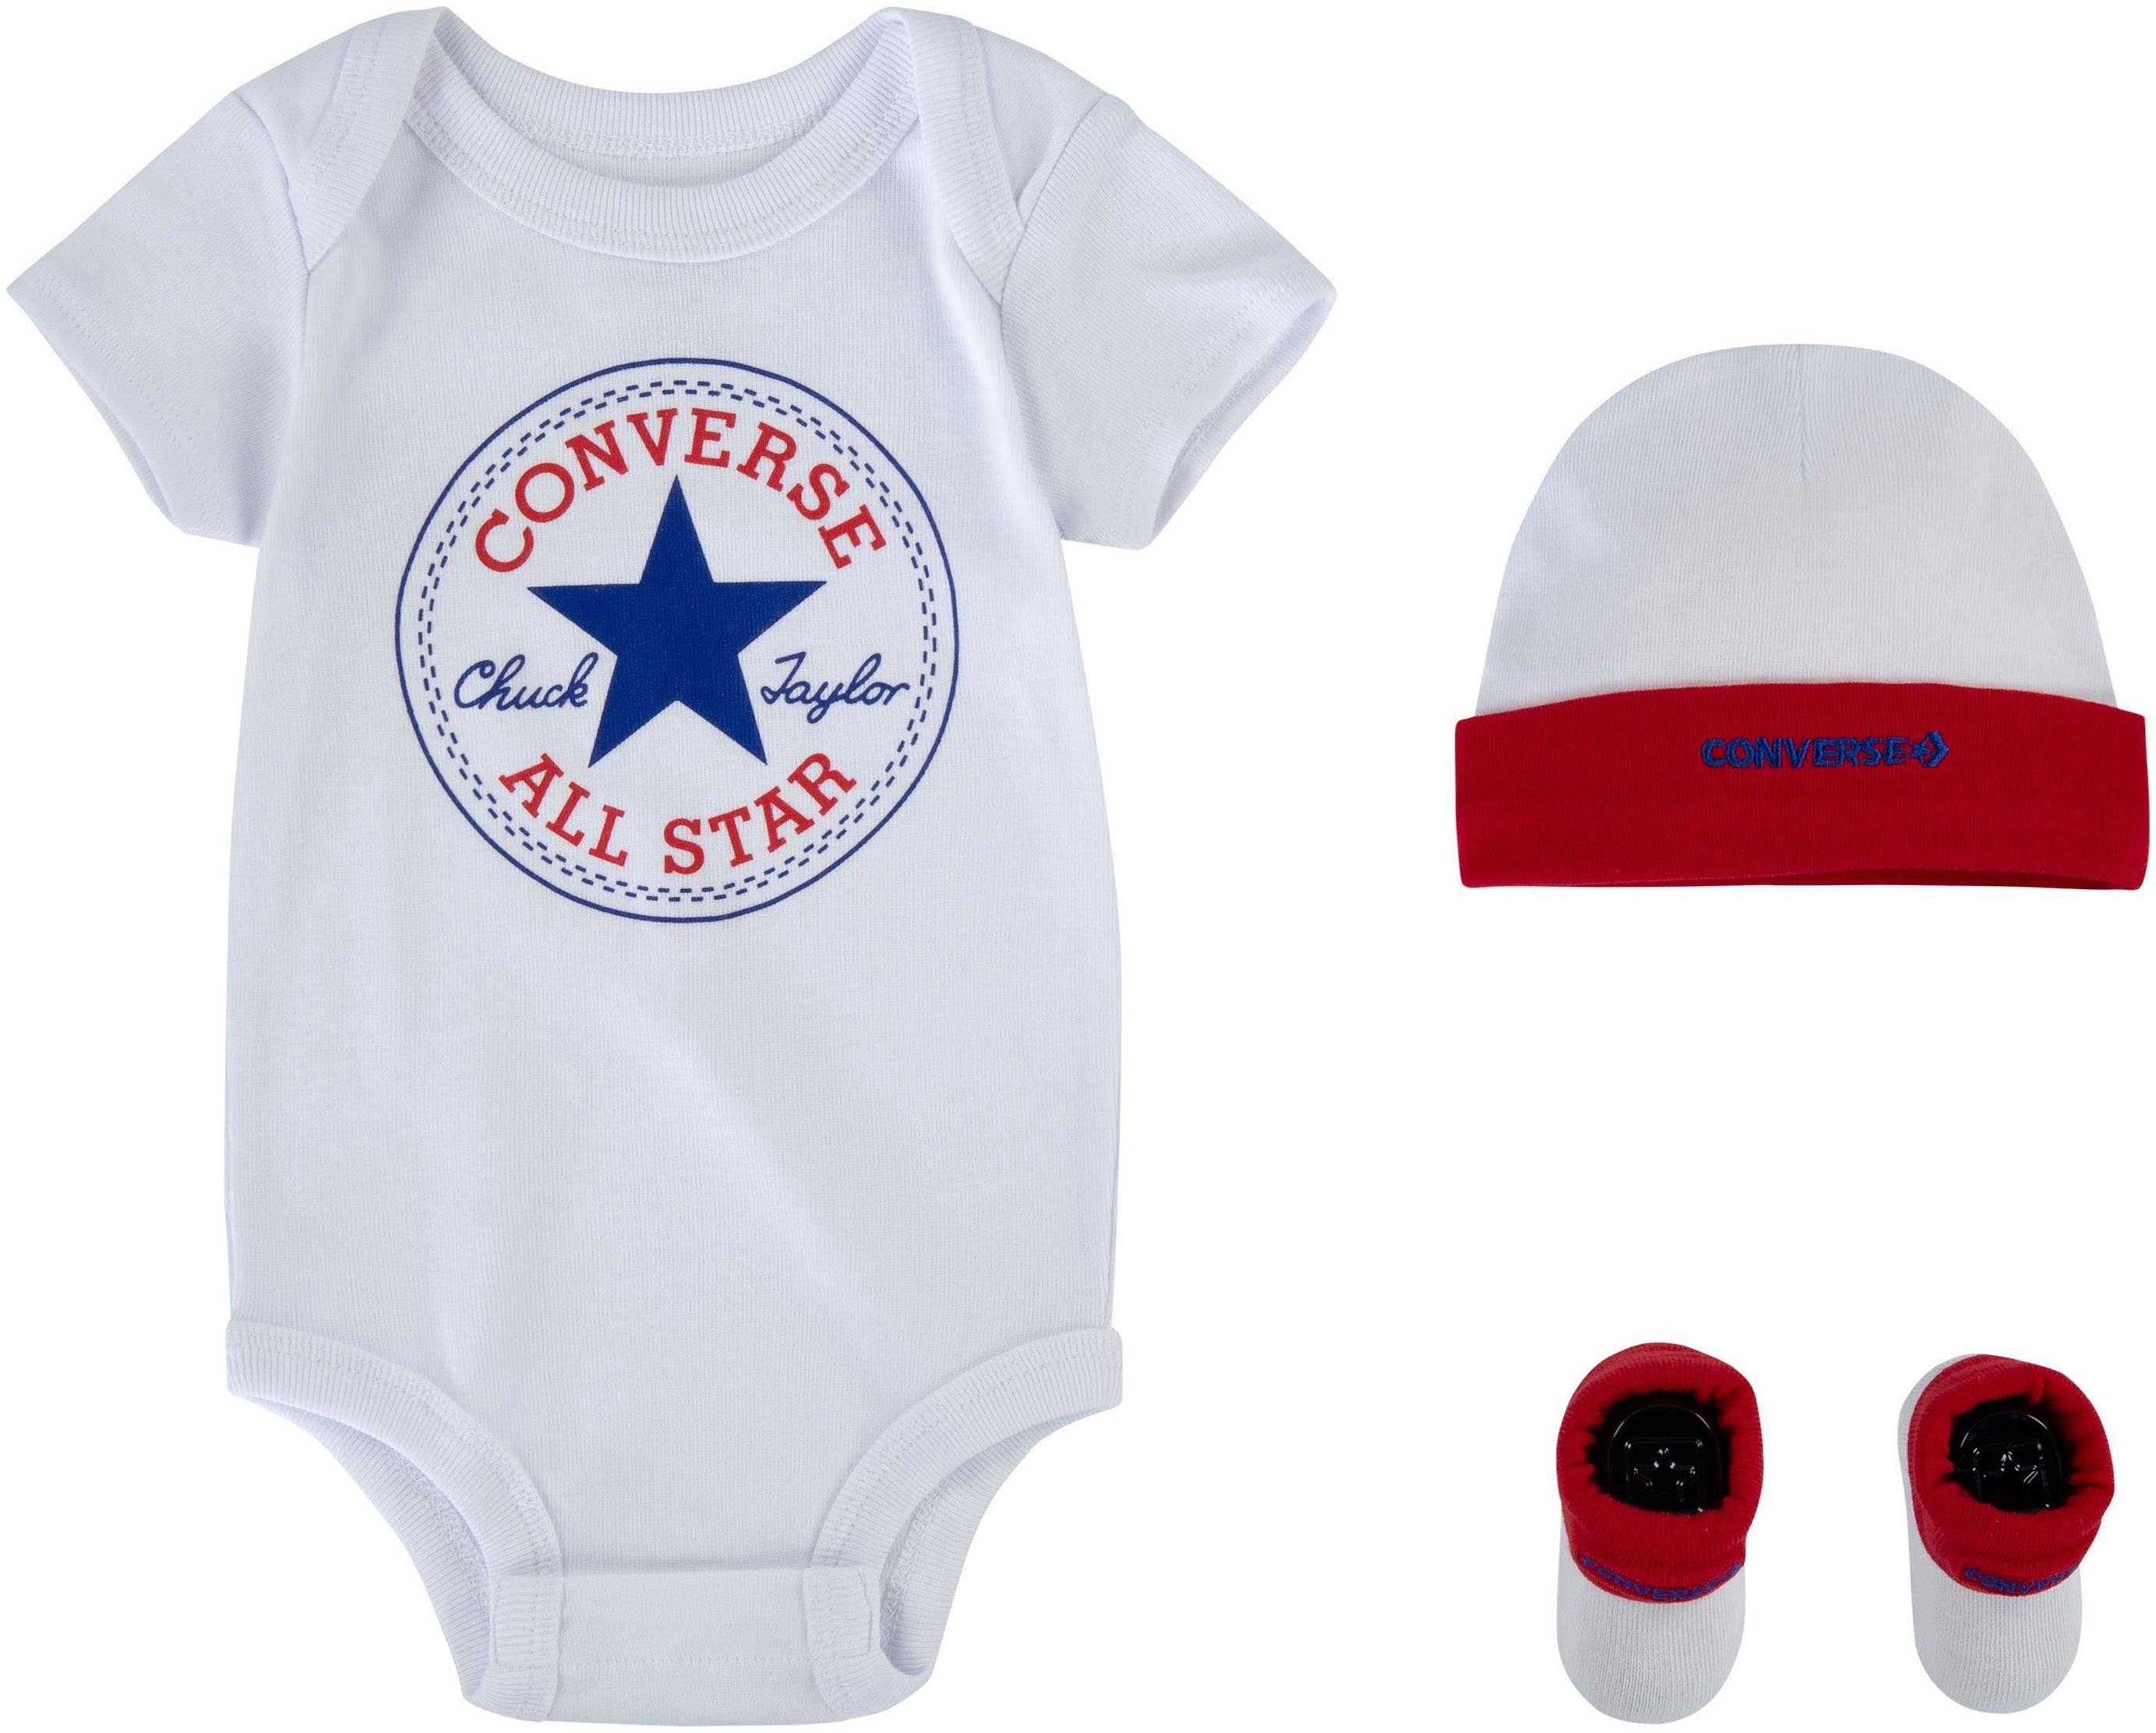 CTP CLASSIC Converse BOO 3-tlg) Body HAT BODYSUIT INFANT (Packung,